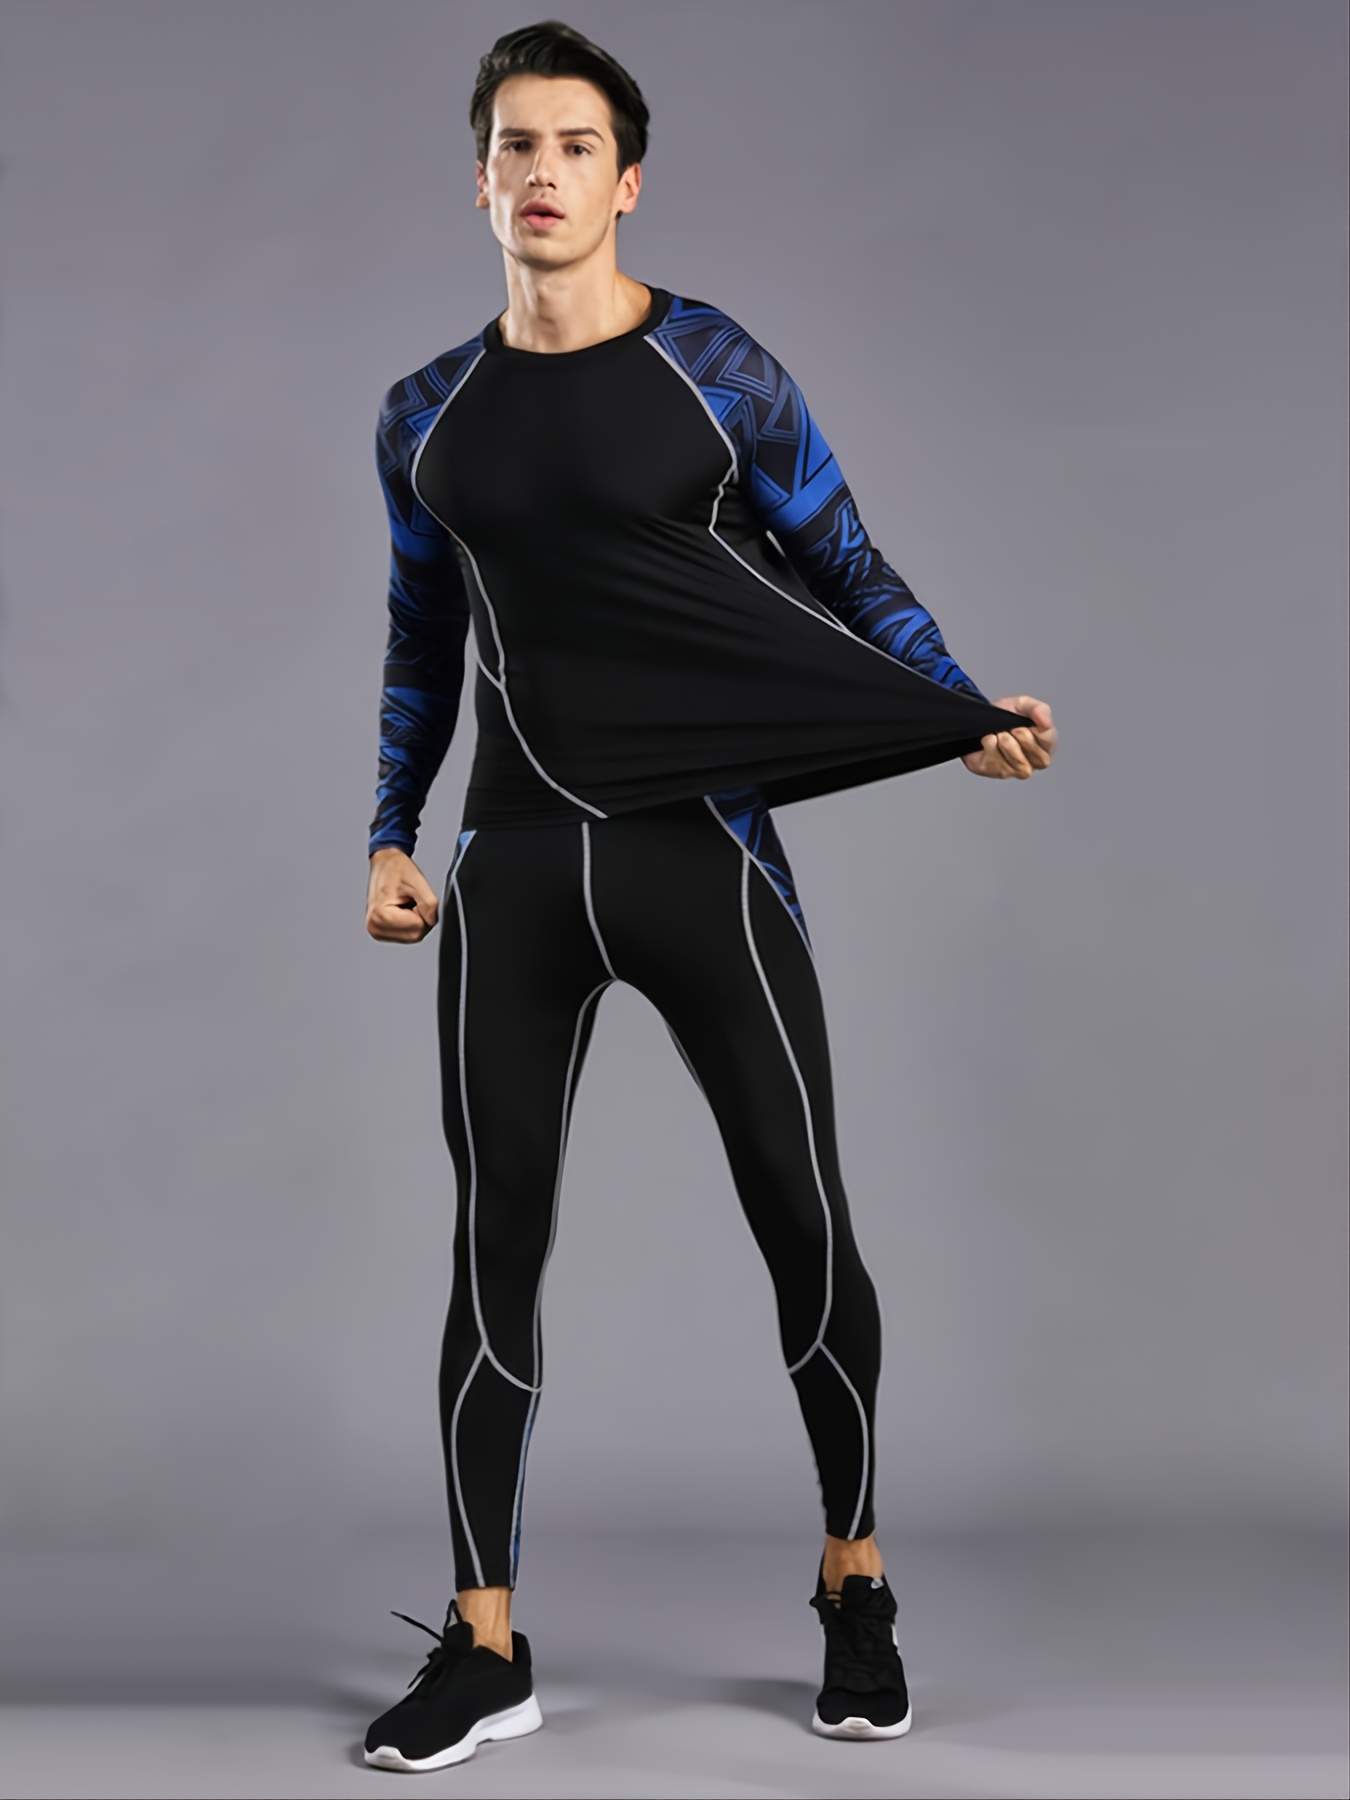 Quick Dry Mens Compression Sportswear Set For Gym, Running, And